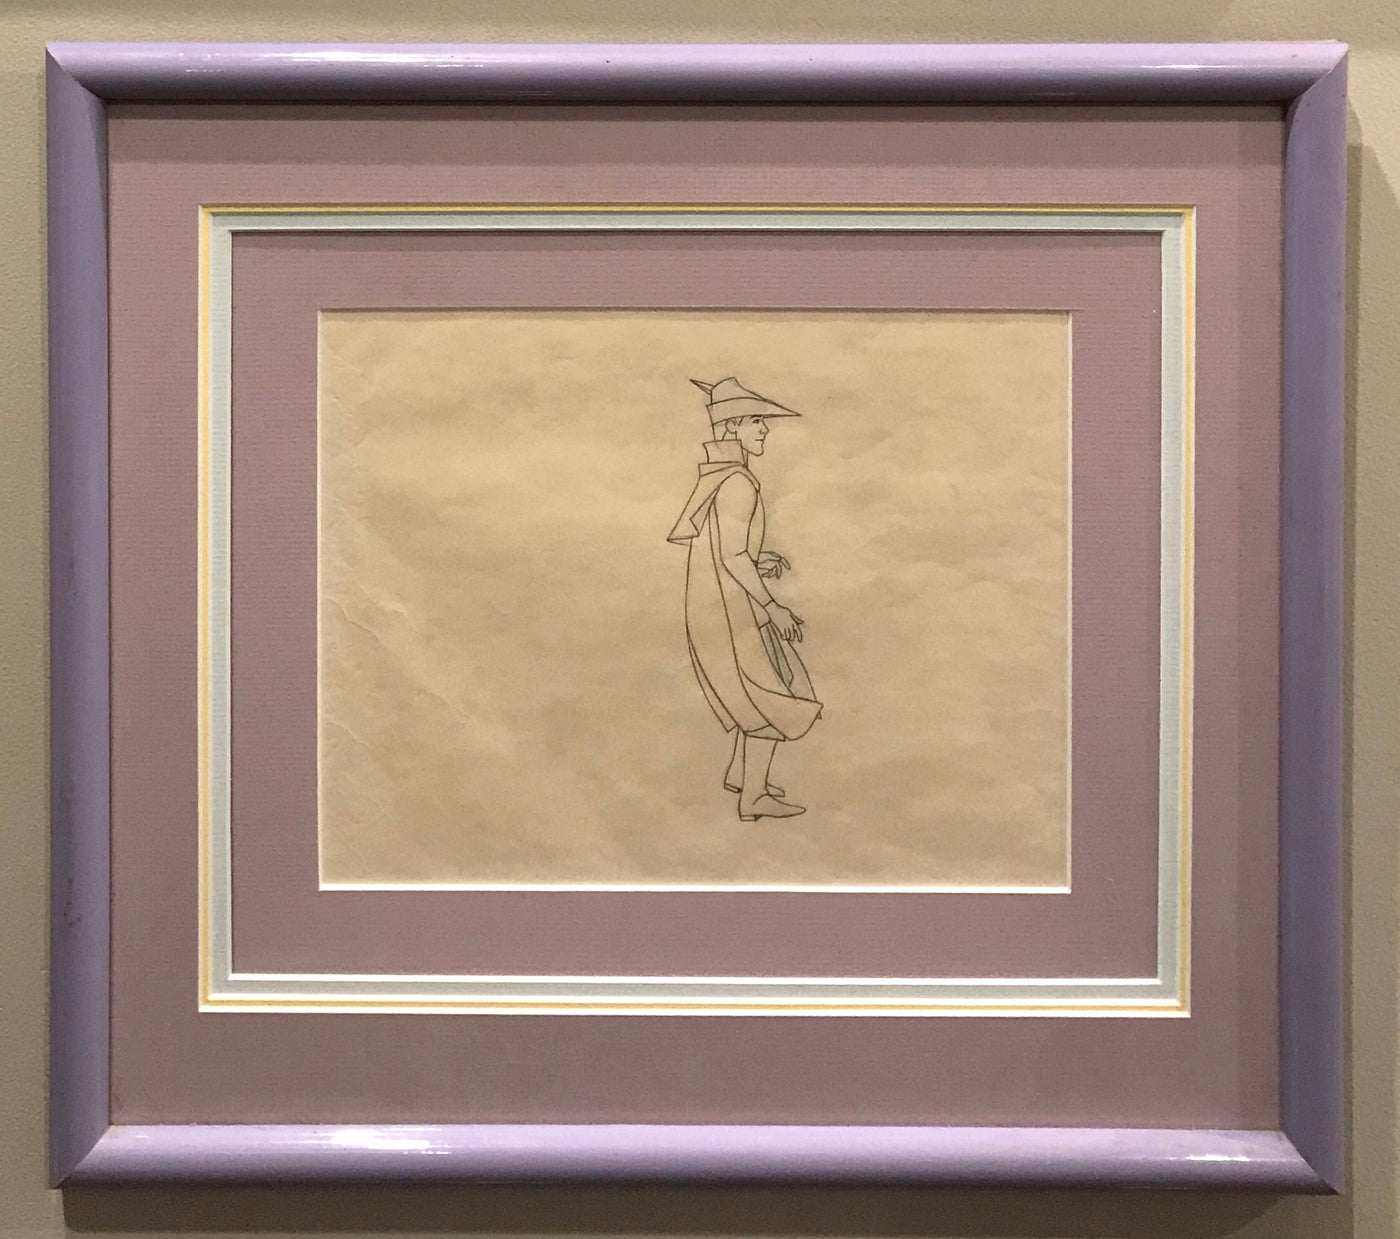 Original Walt Disney Production Drawing from Sleeping Beauty featuring Prince Phillip